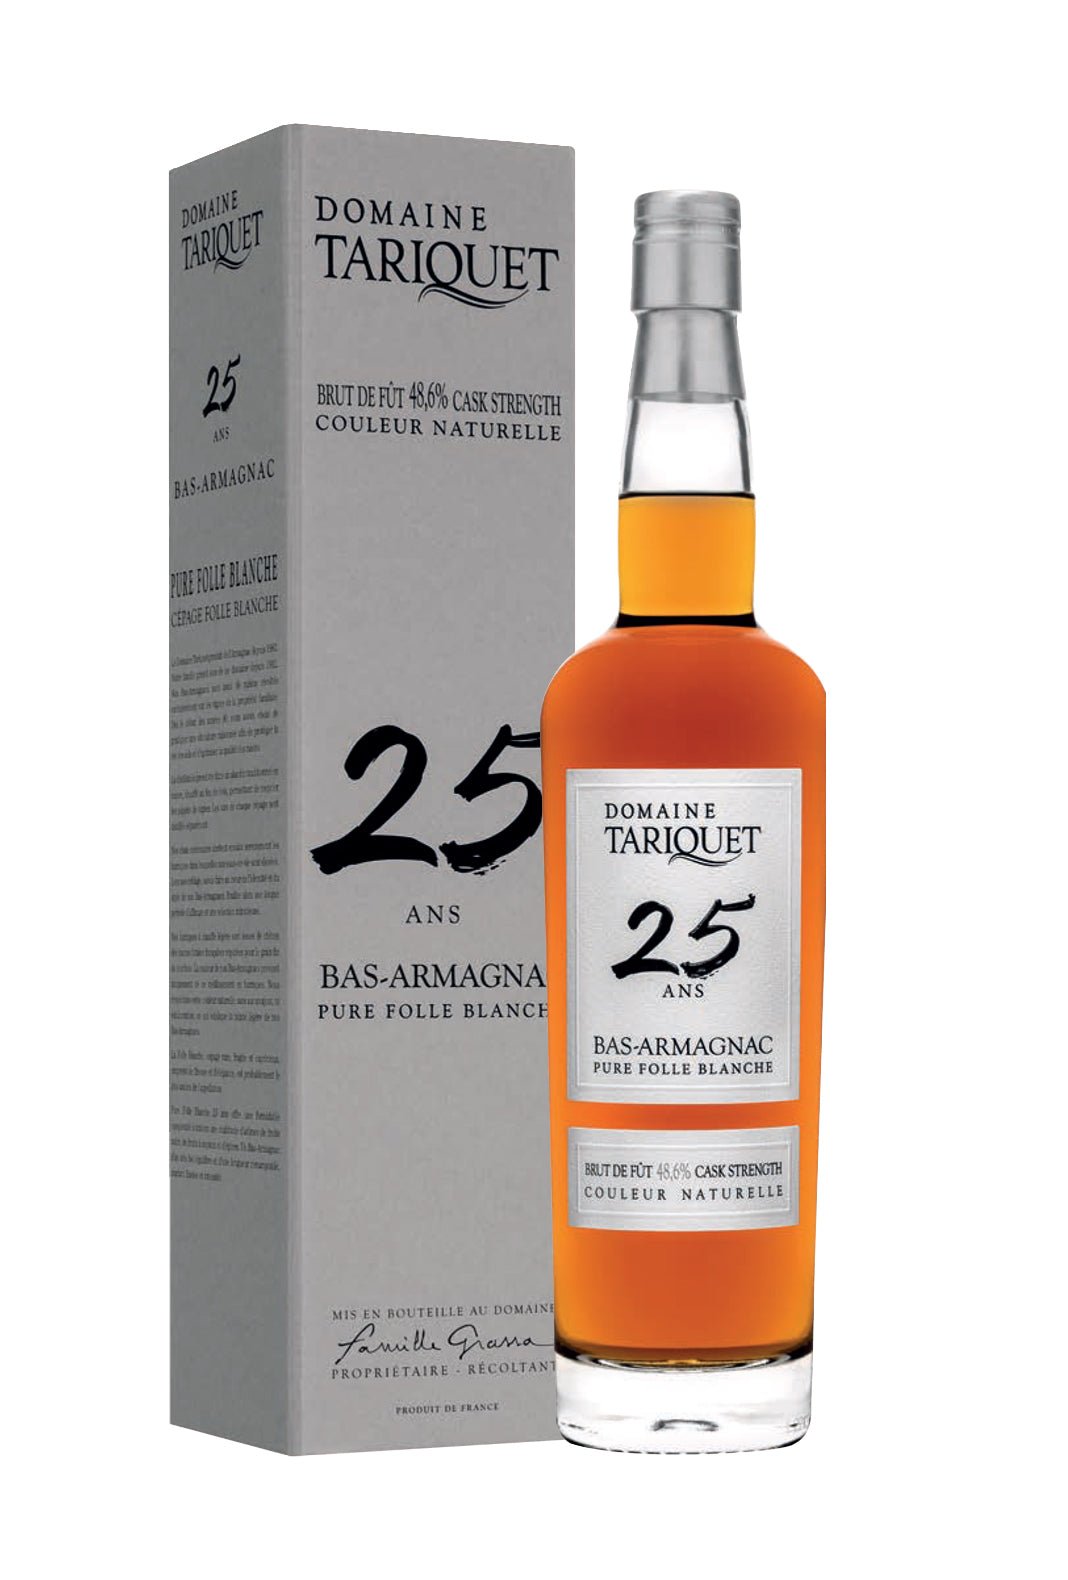 Domaine Tariquet Bas-Armagnac 25 years Pure Folle Blanche 48.6% 700ml | | Shop online at Spirits of France